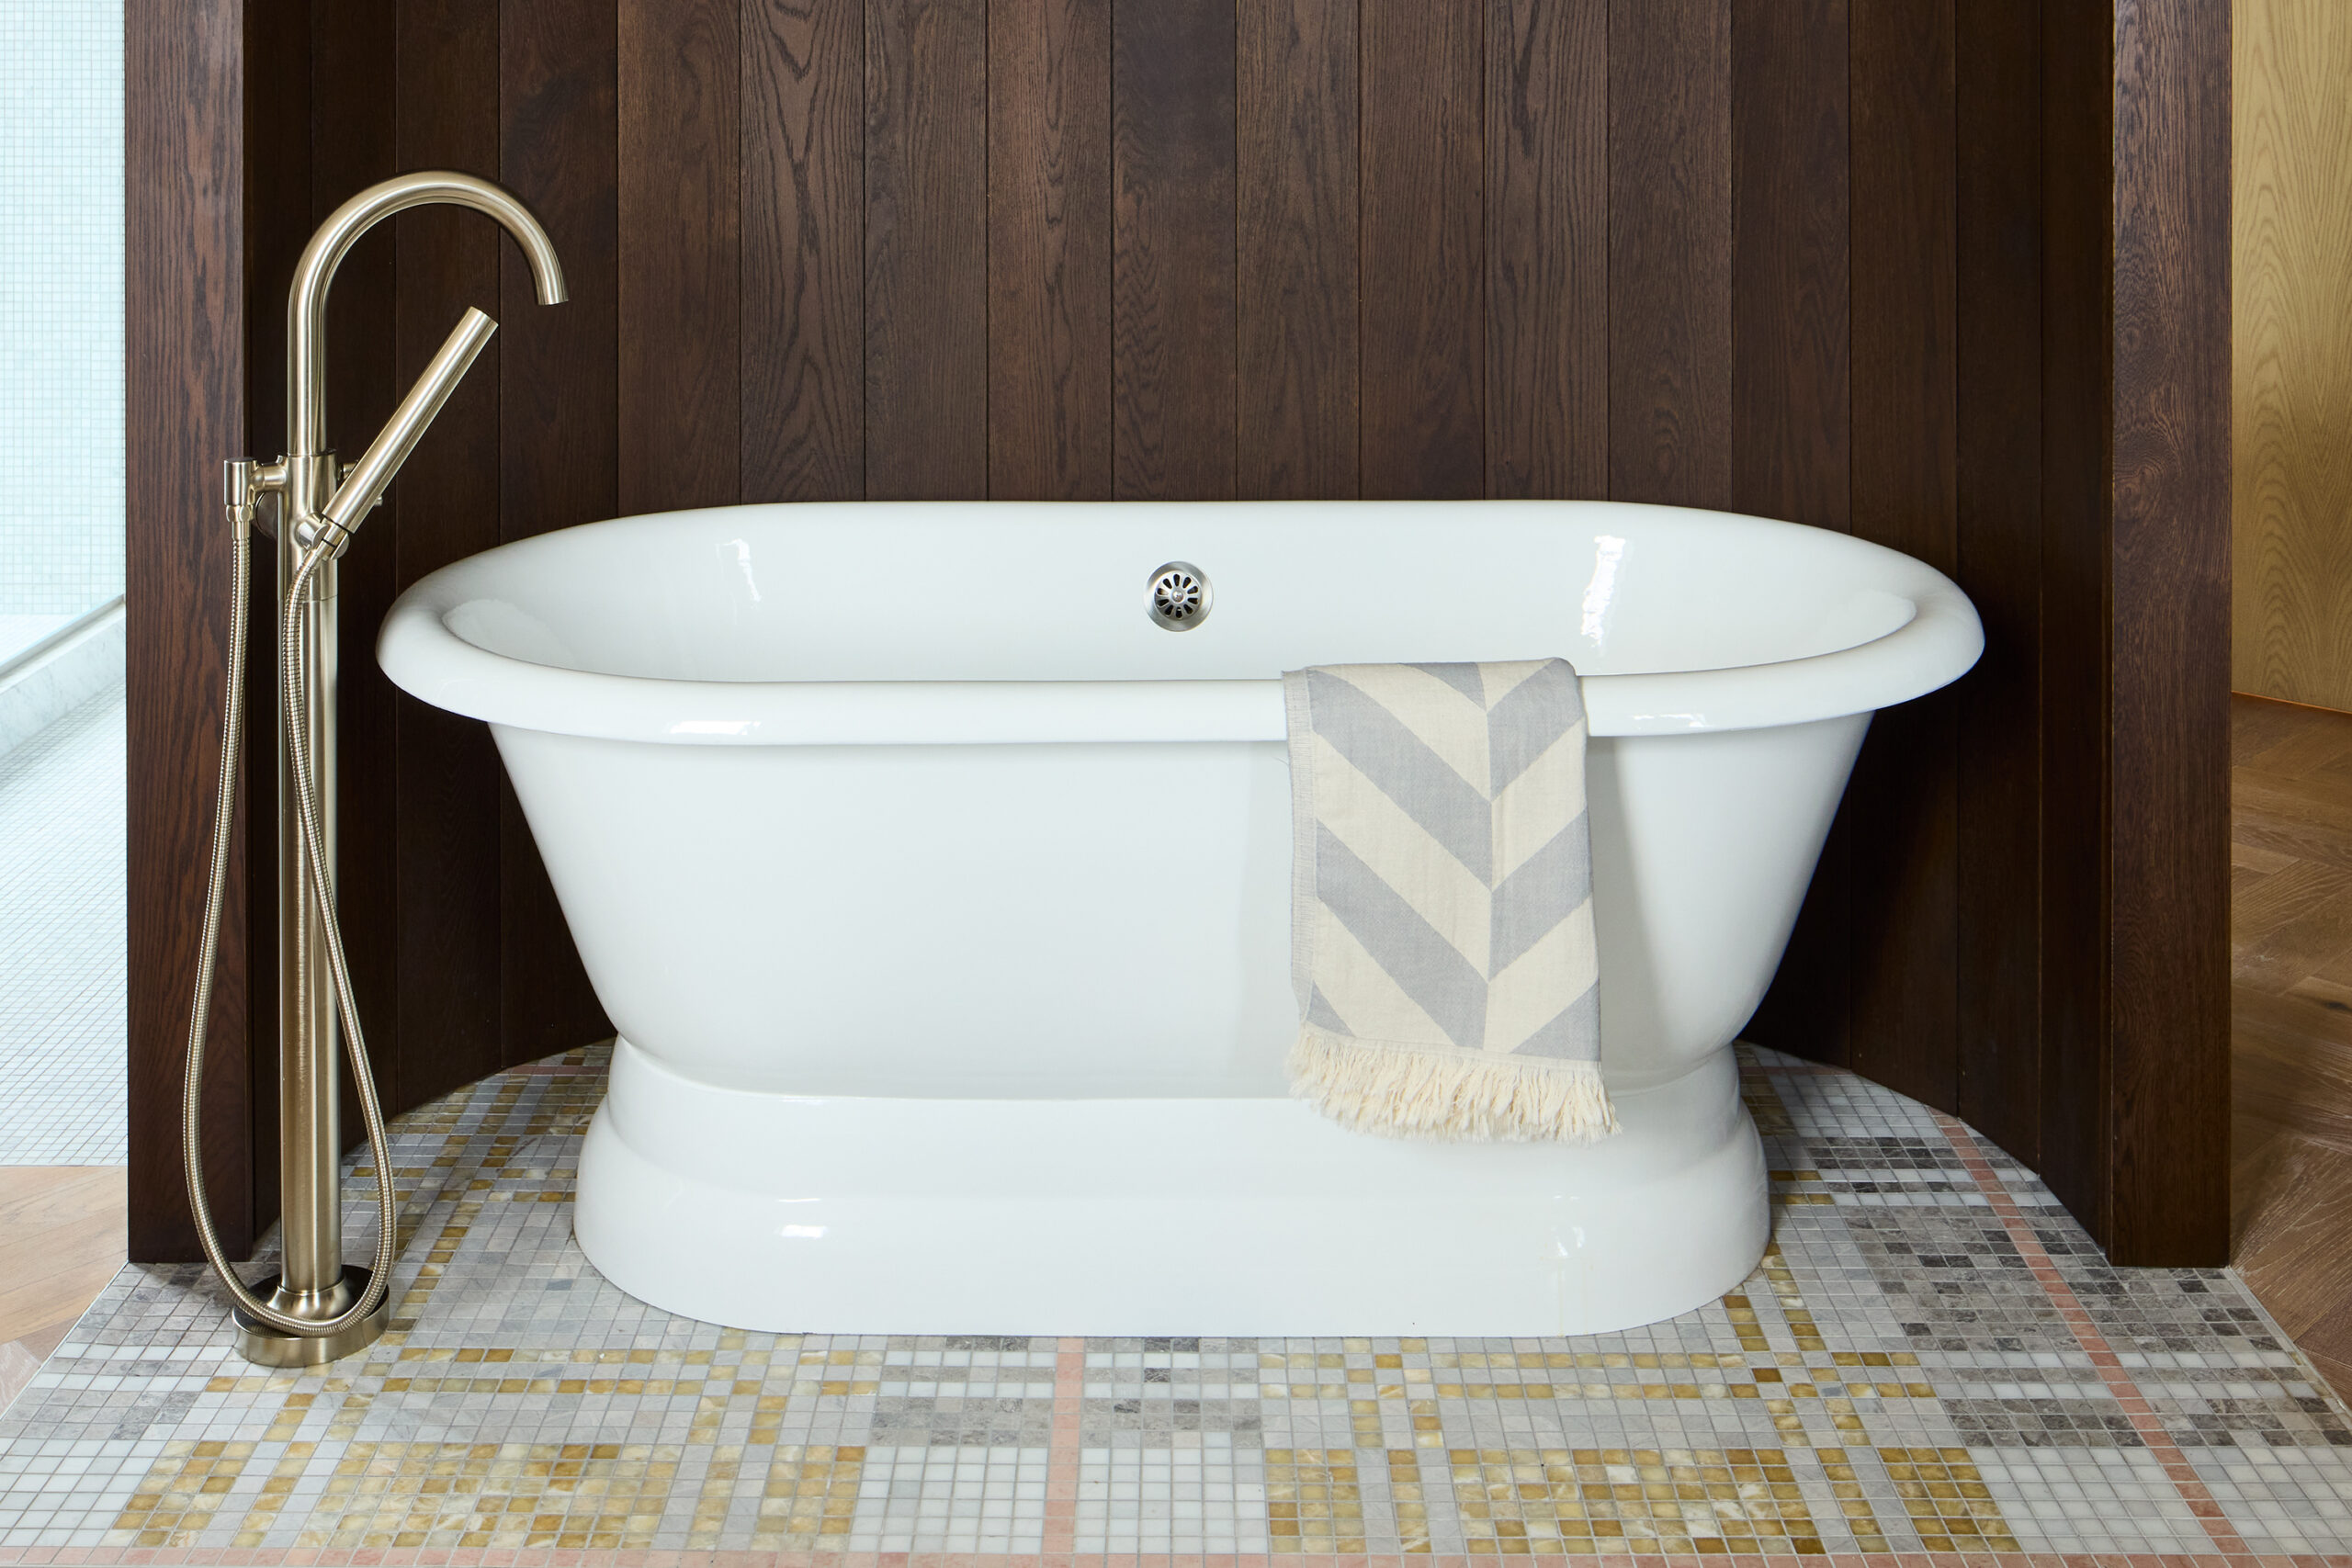 White stand alone tub, on a dark wood panelled background and gold fixtures